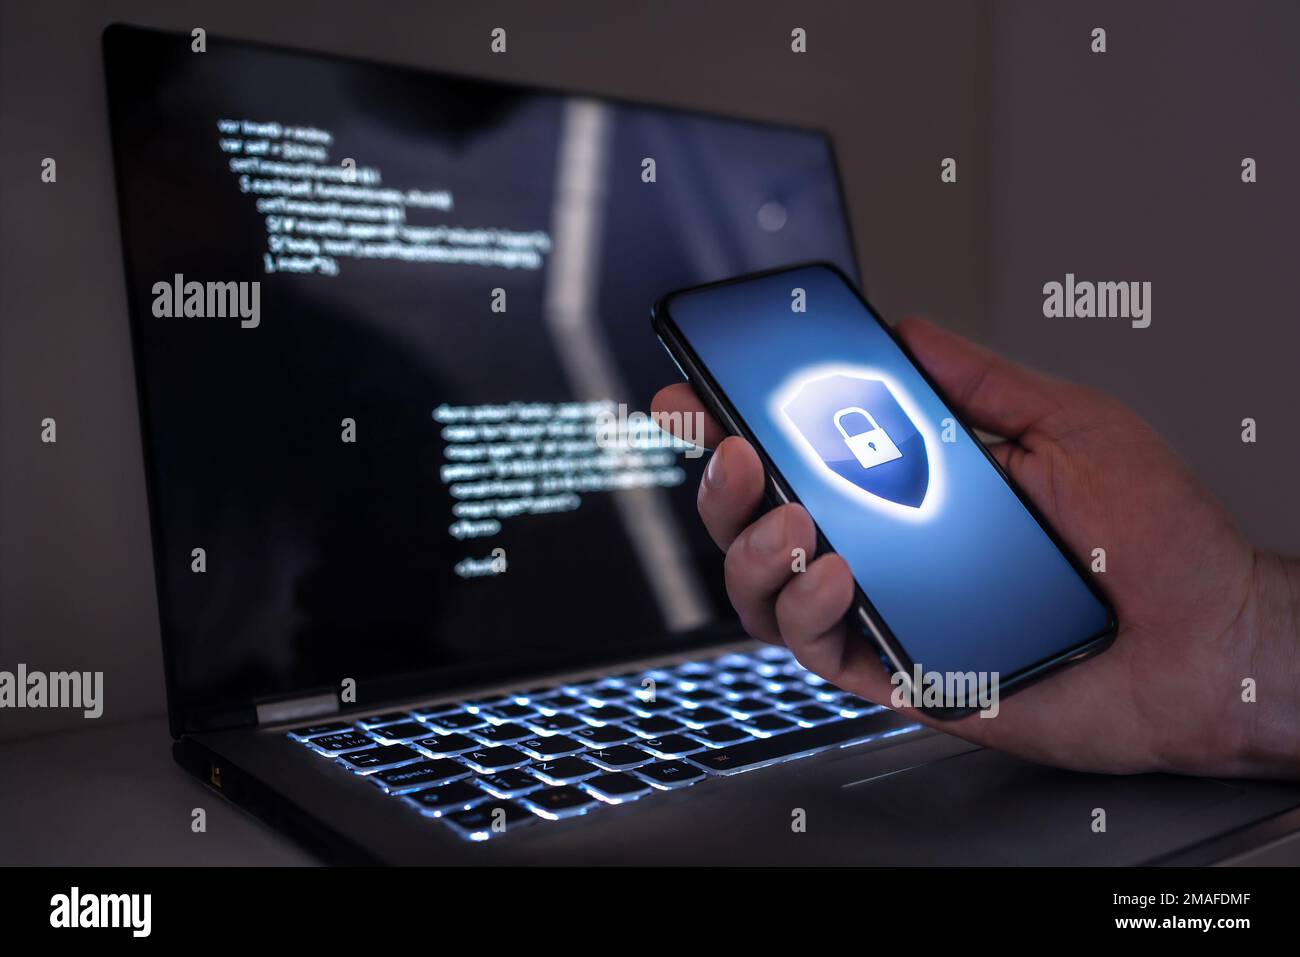 Cyber security in phone and laptop to protect from fraud, cybersecurity attack or identity theft. Electronic mobile scam, online computer data crime. Stock Photo